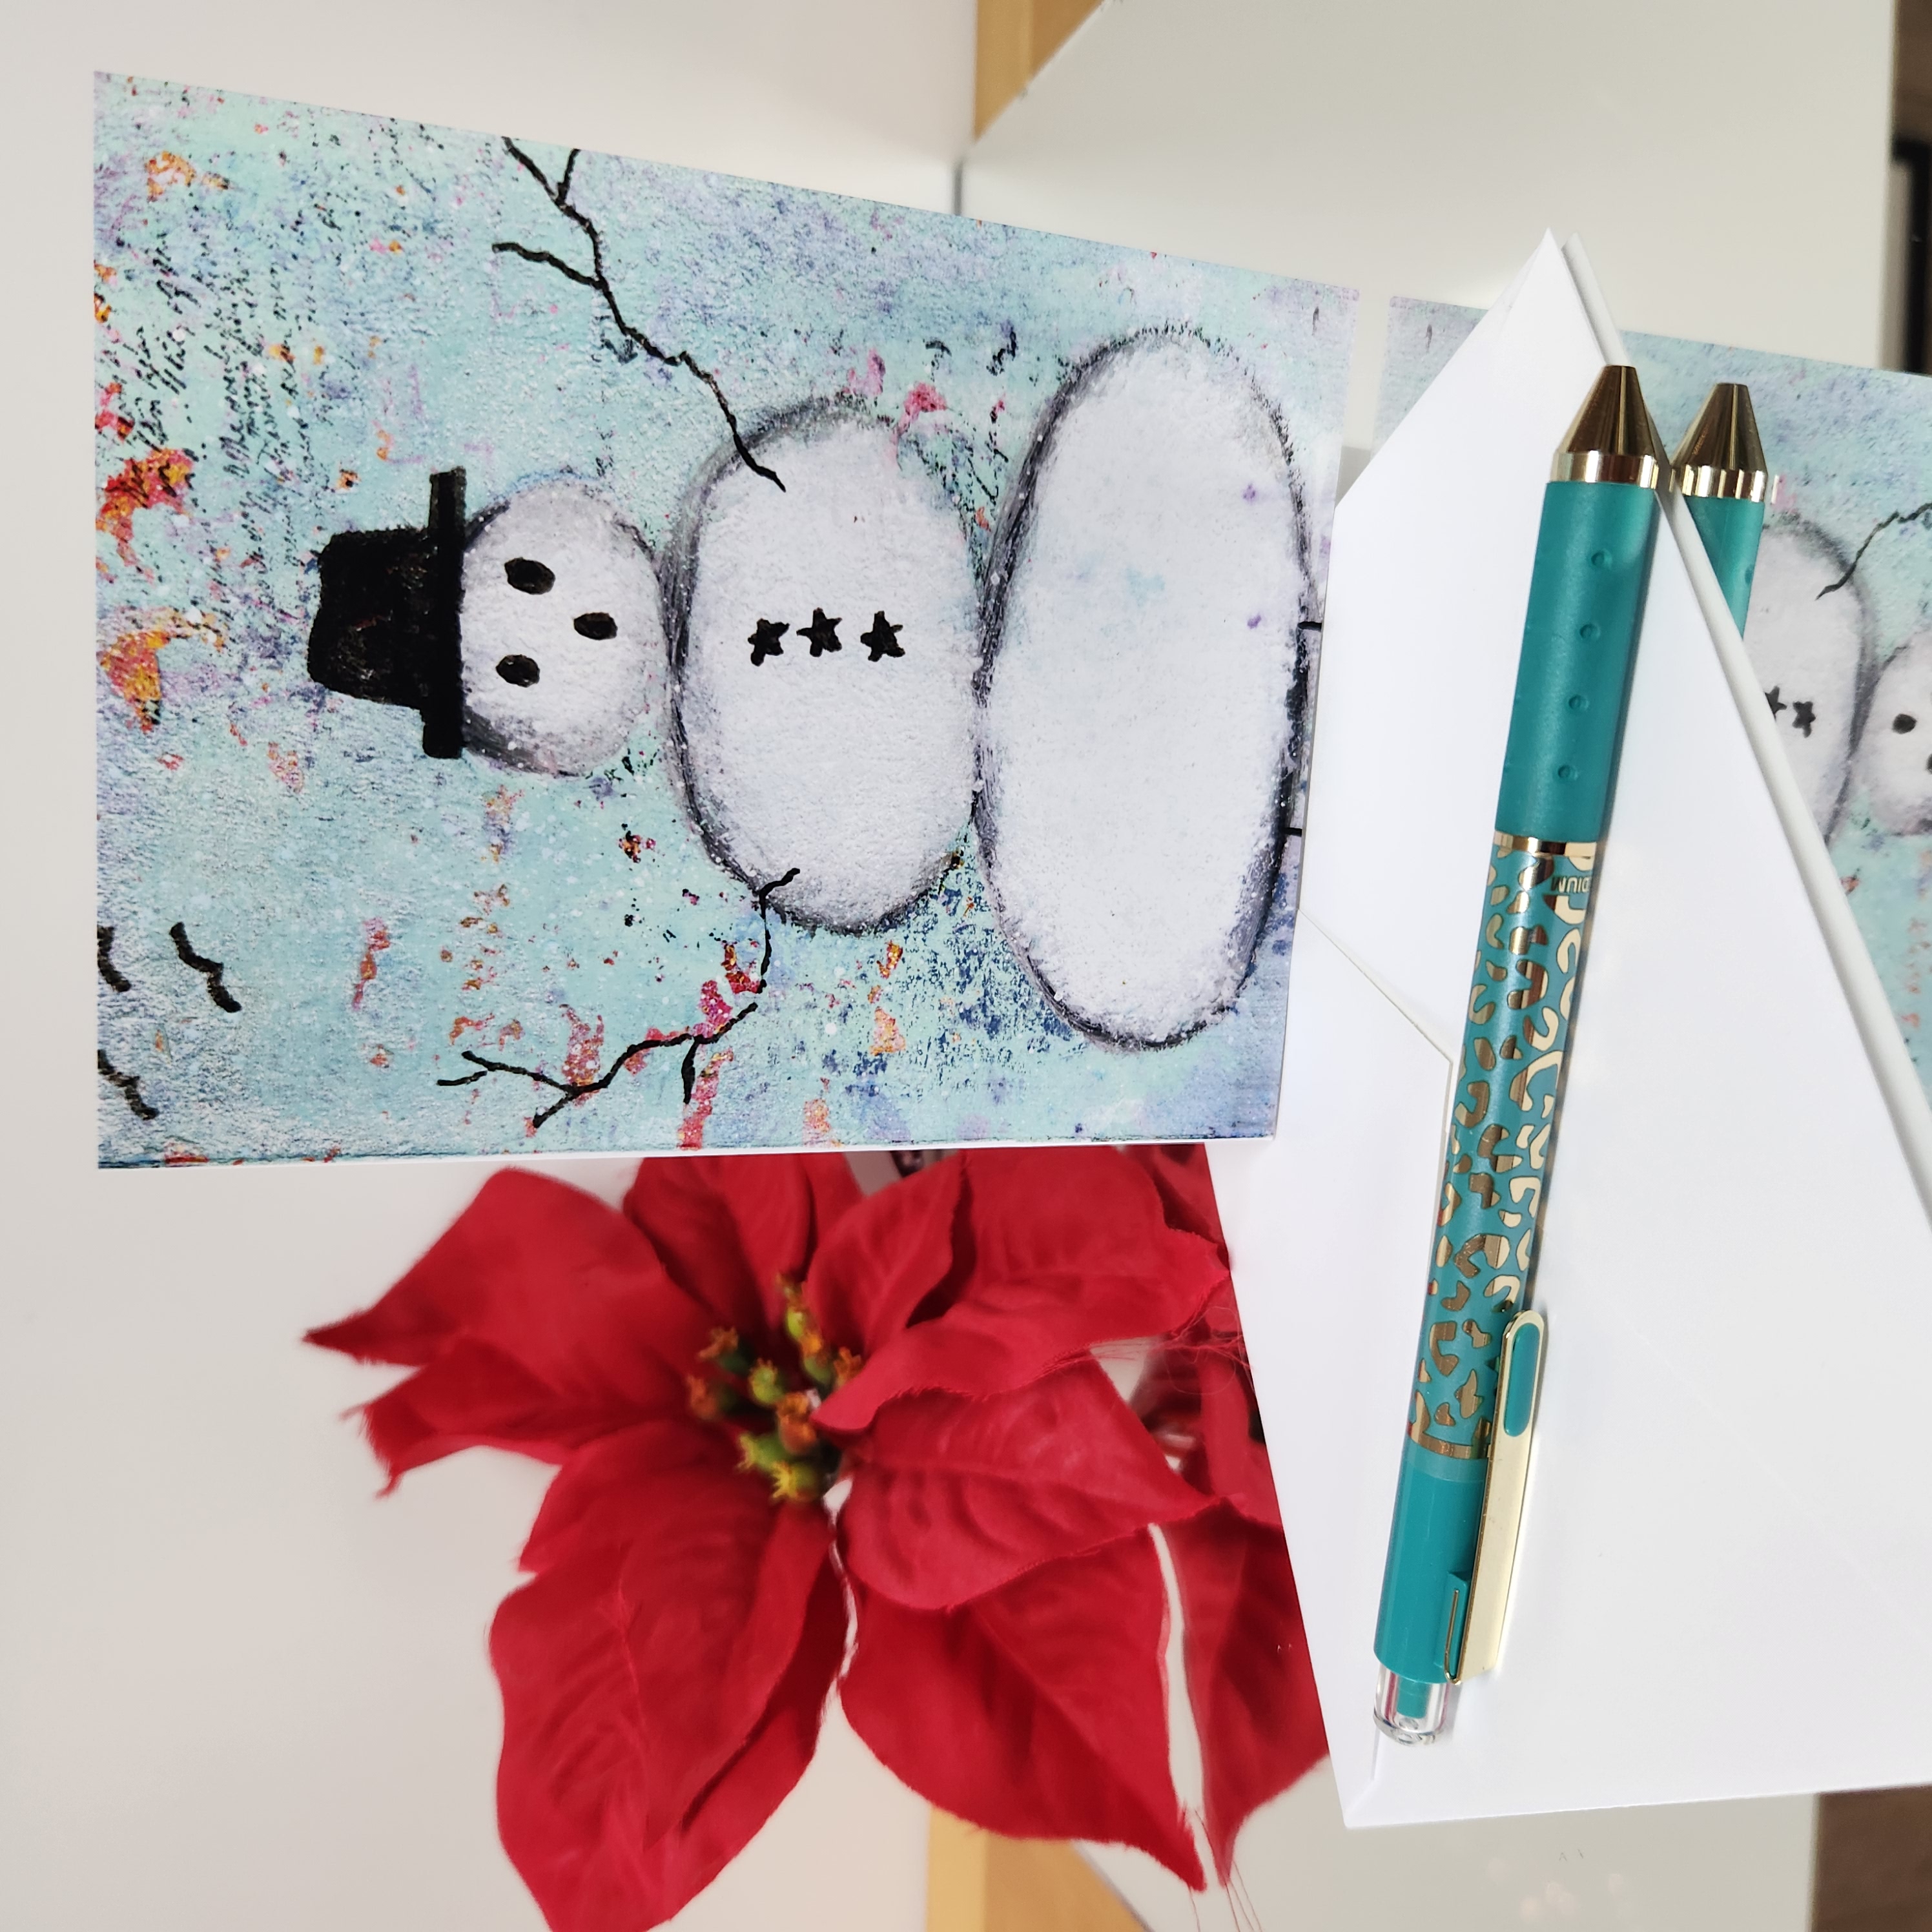 Mr. Bill- A2 greeting card with snowman artwork on the front. Patty Donahue artist